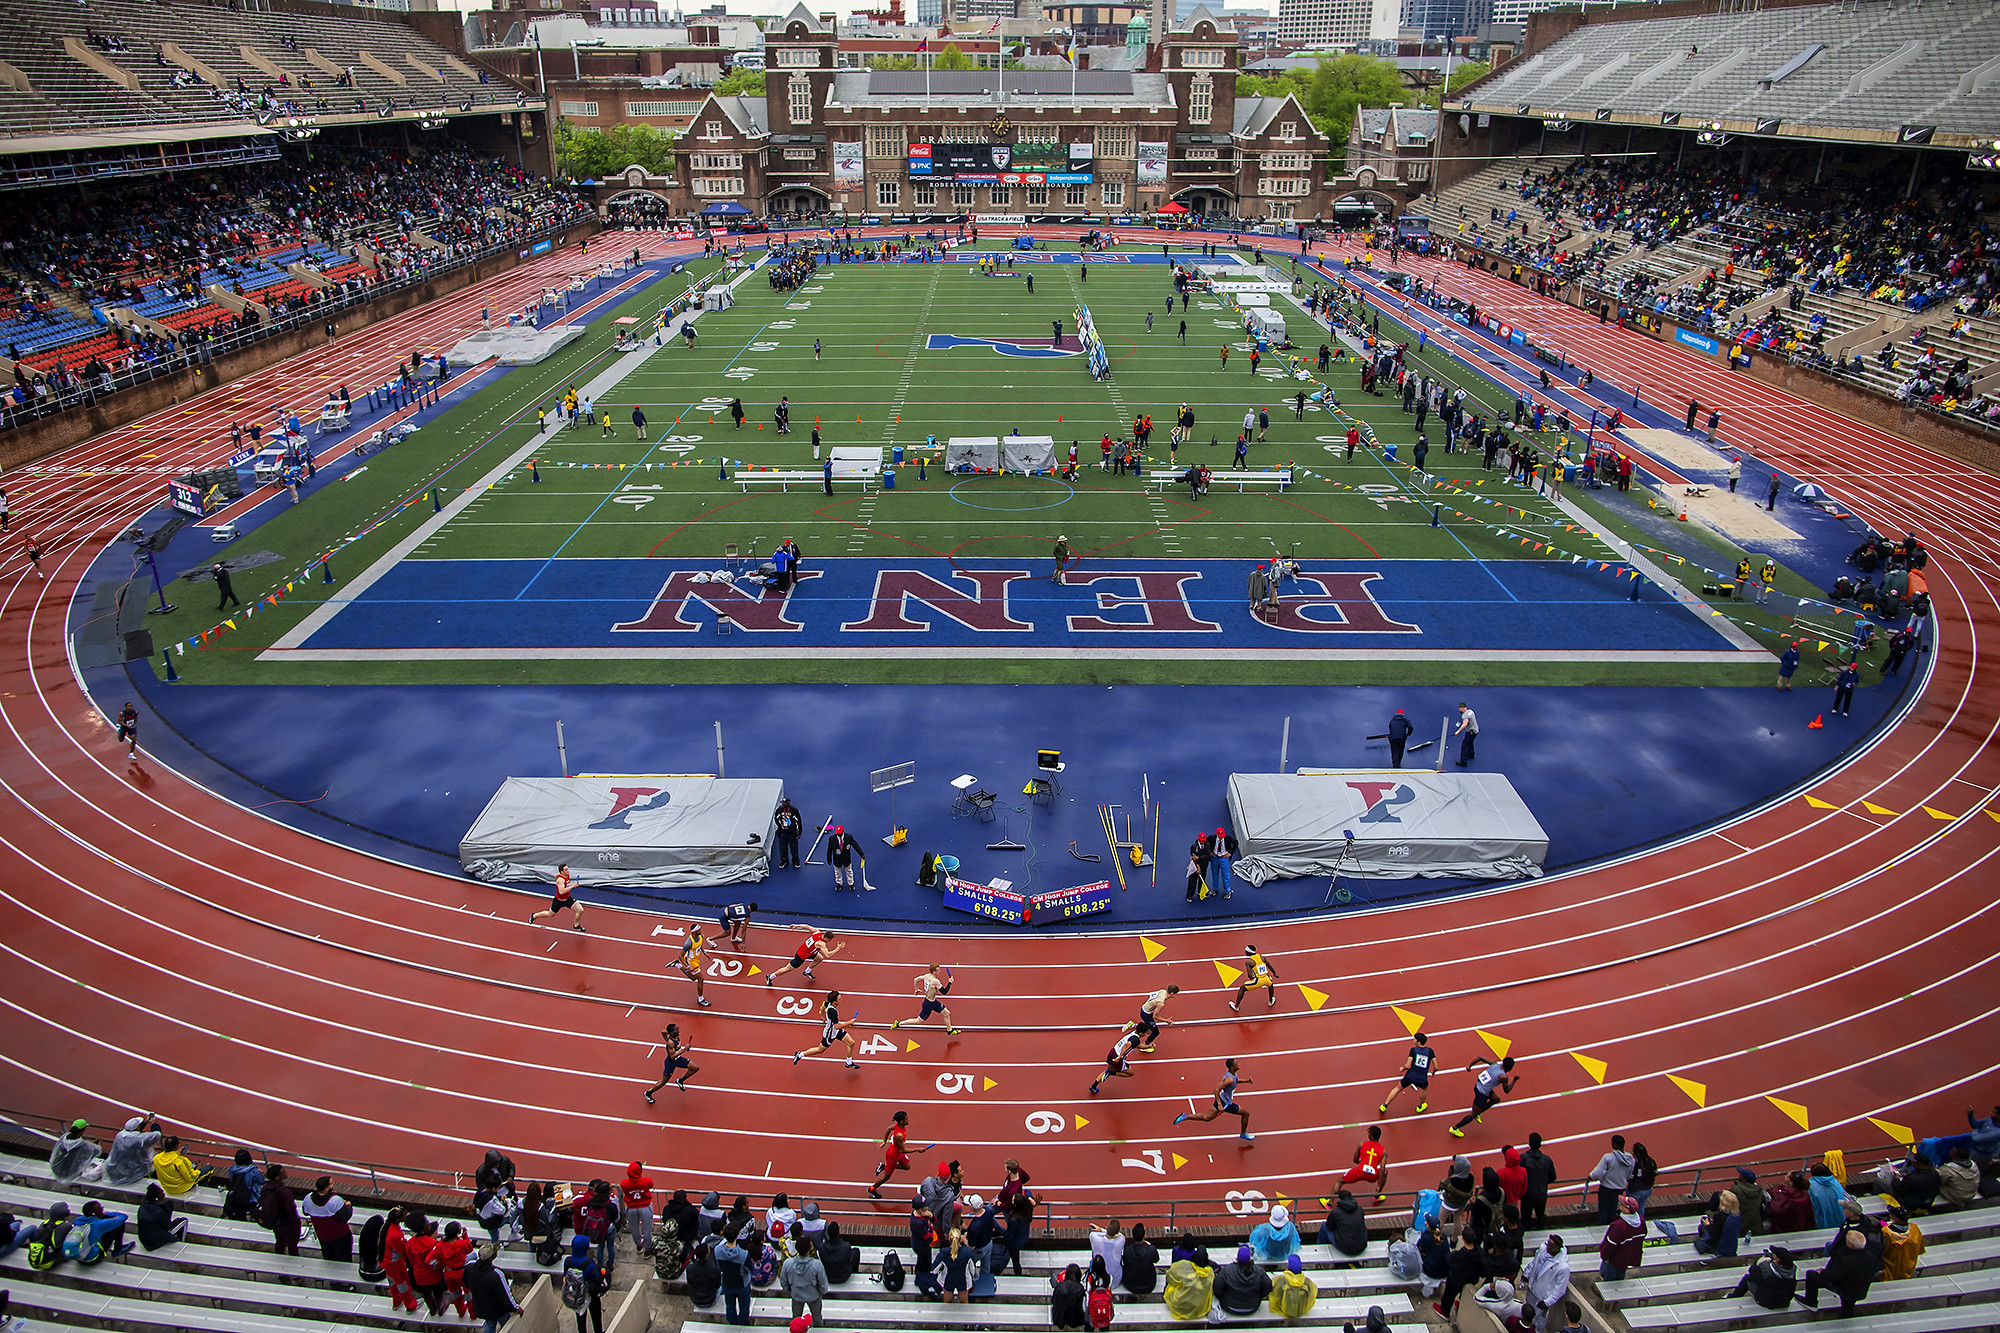 Athletes compete at the 2019 Penn Relays.